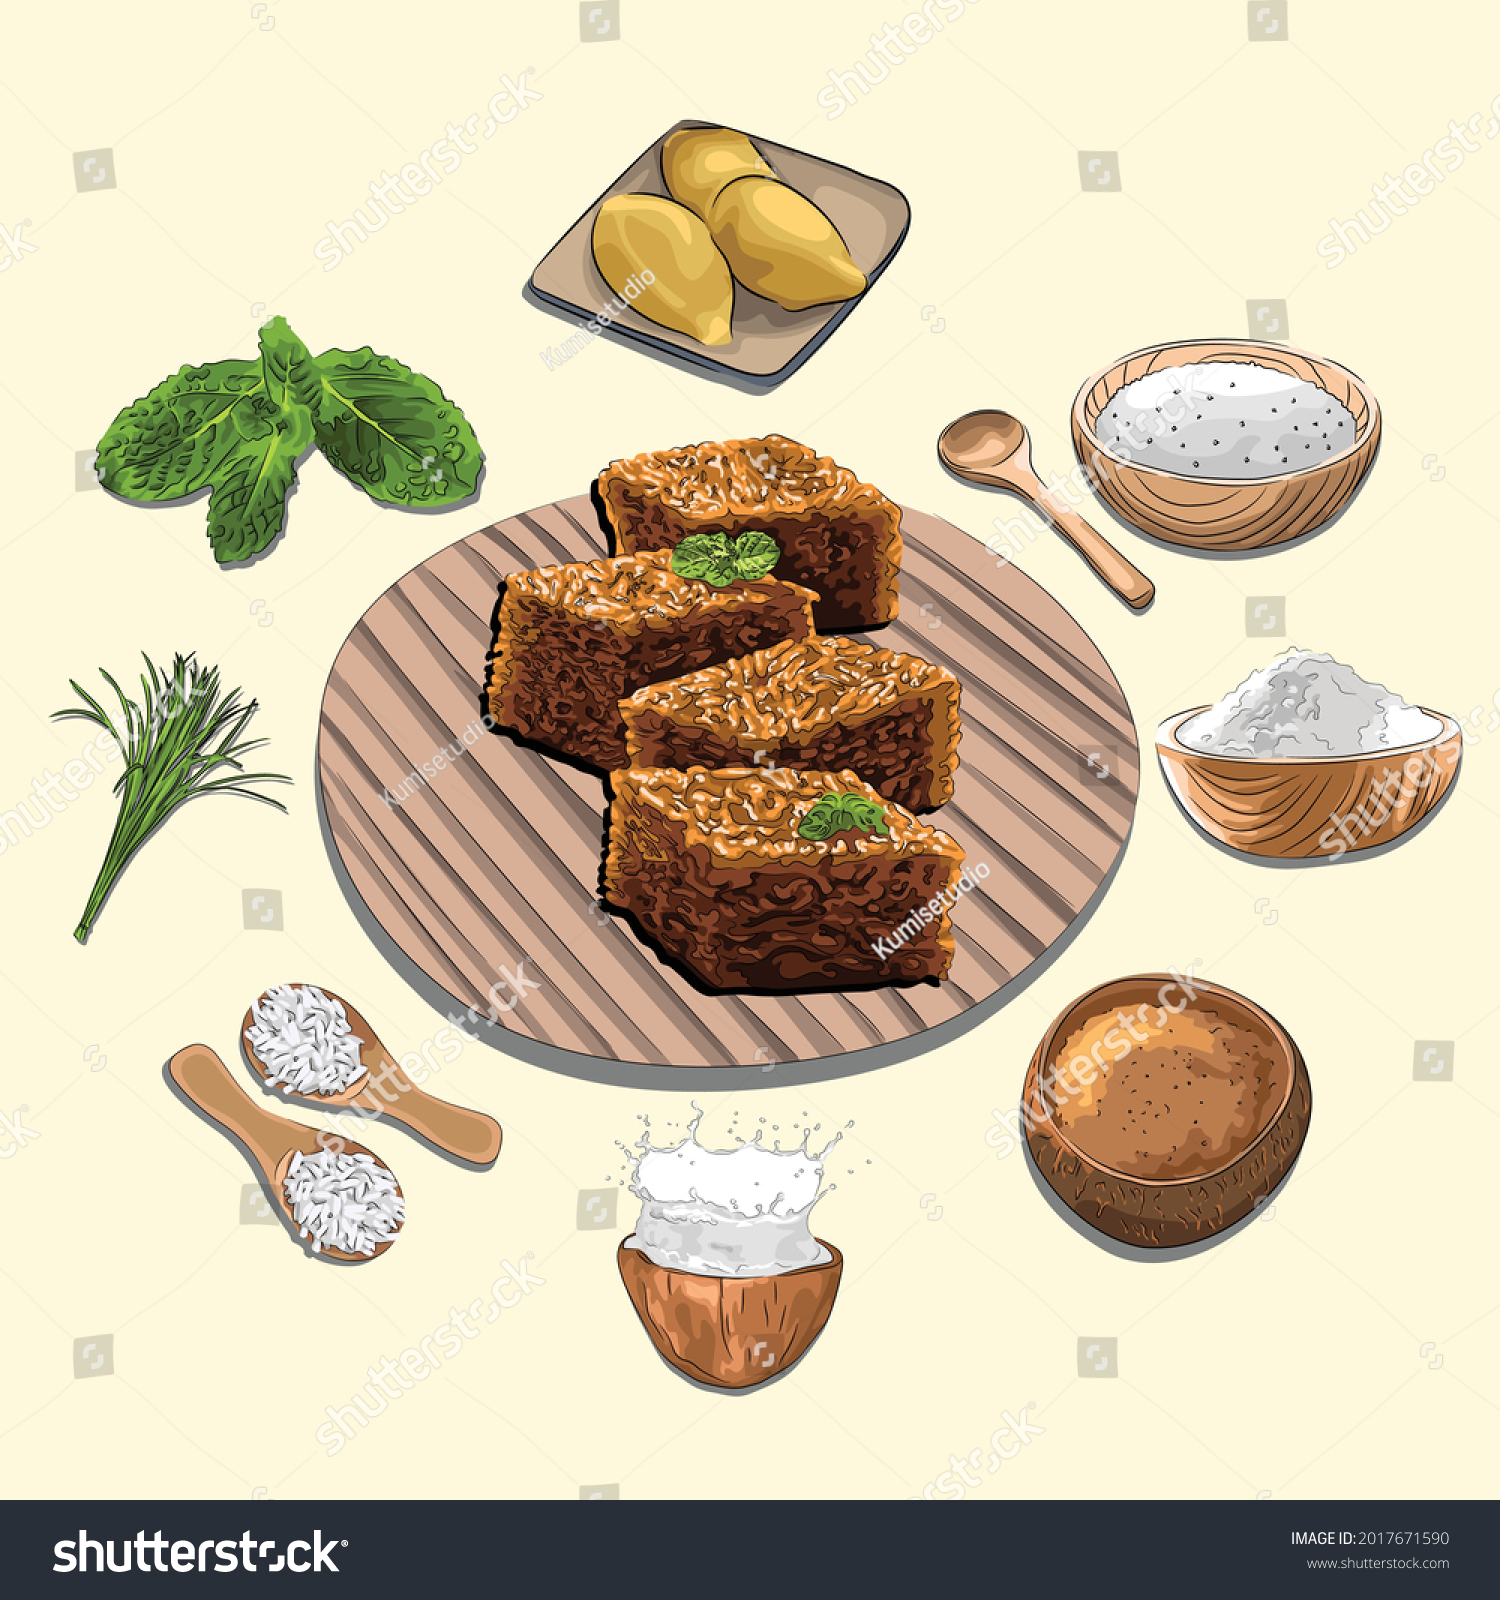 SVG of Wajik Durian And Ingredients Illustration, Sketch And Vector Style, Traditional Food From Aceh, Good to use for restaurant menu, Indonesian food recipe book, and food content. svg